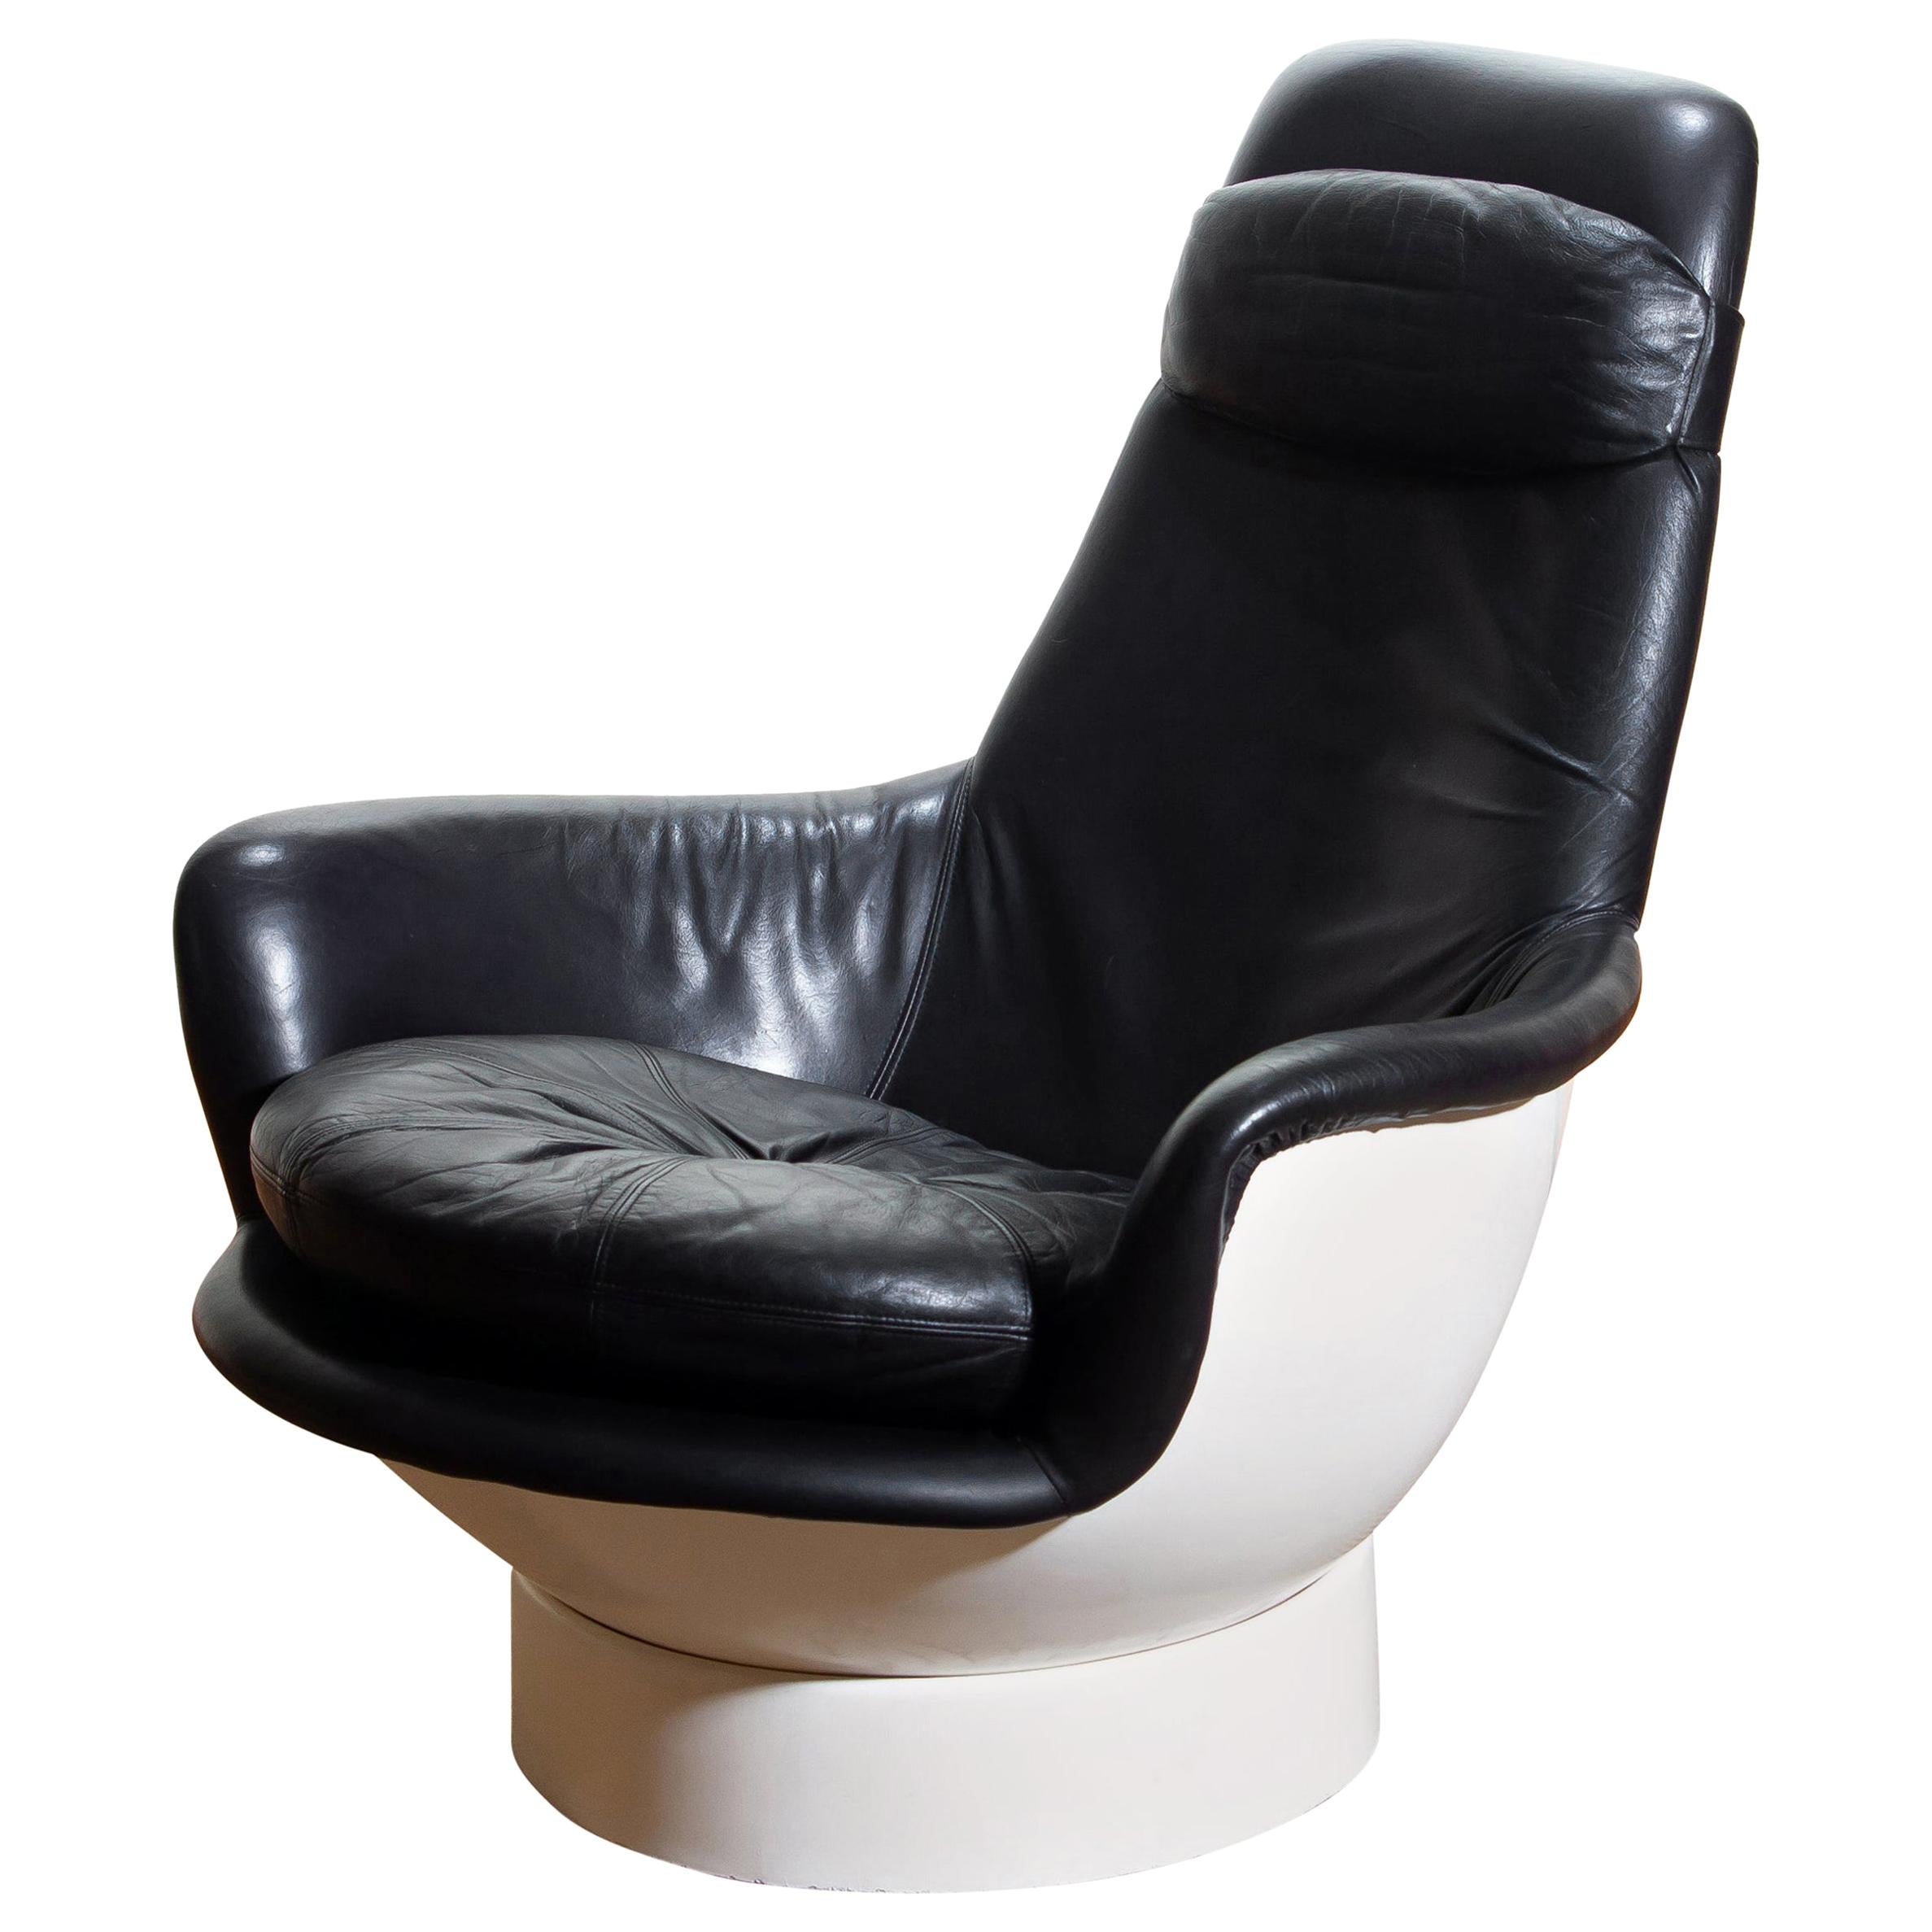 Wonderful Space Age lounge chair by Peem Oy in fiberglass, upholstered with dark purple leather. Made in Finland, 1970s.
Named 